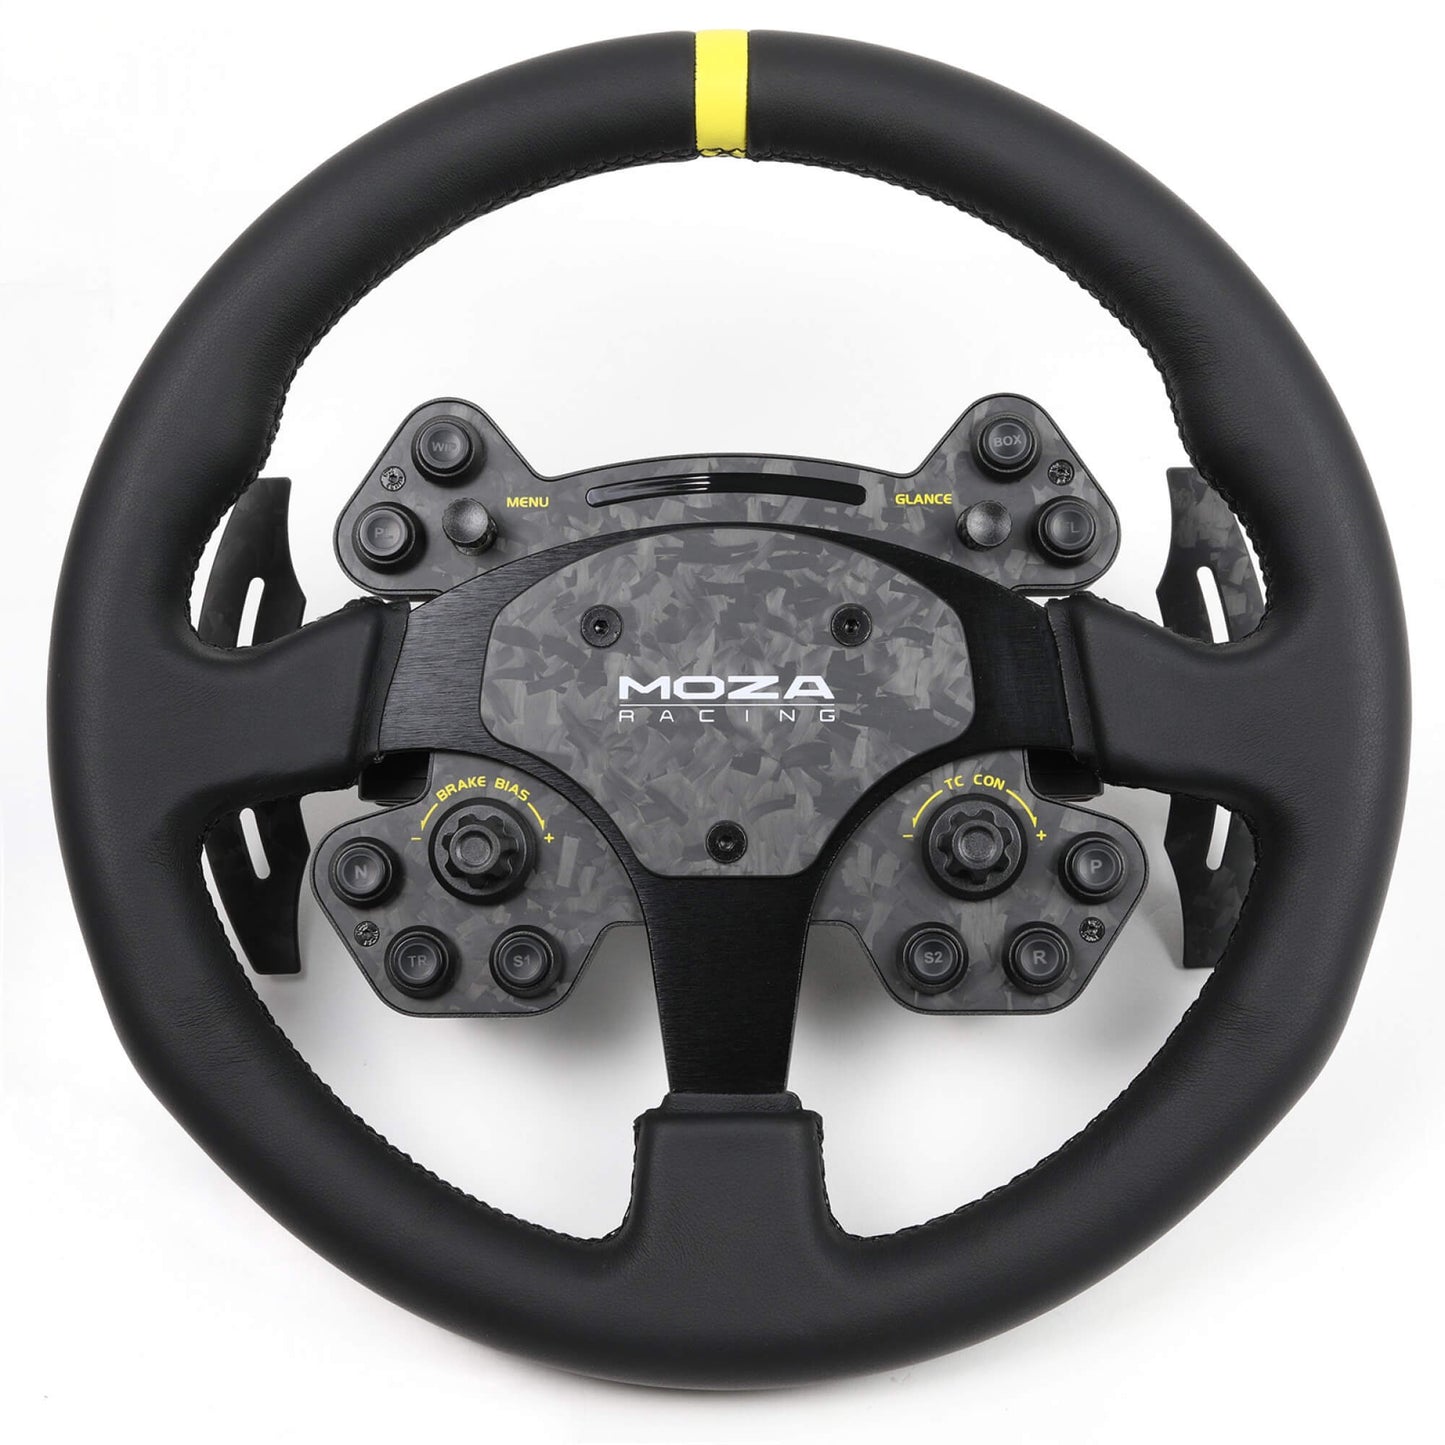 "Moza Racing RS V2 Steering Wheel Leather Version"